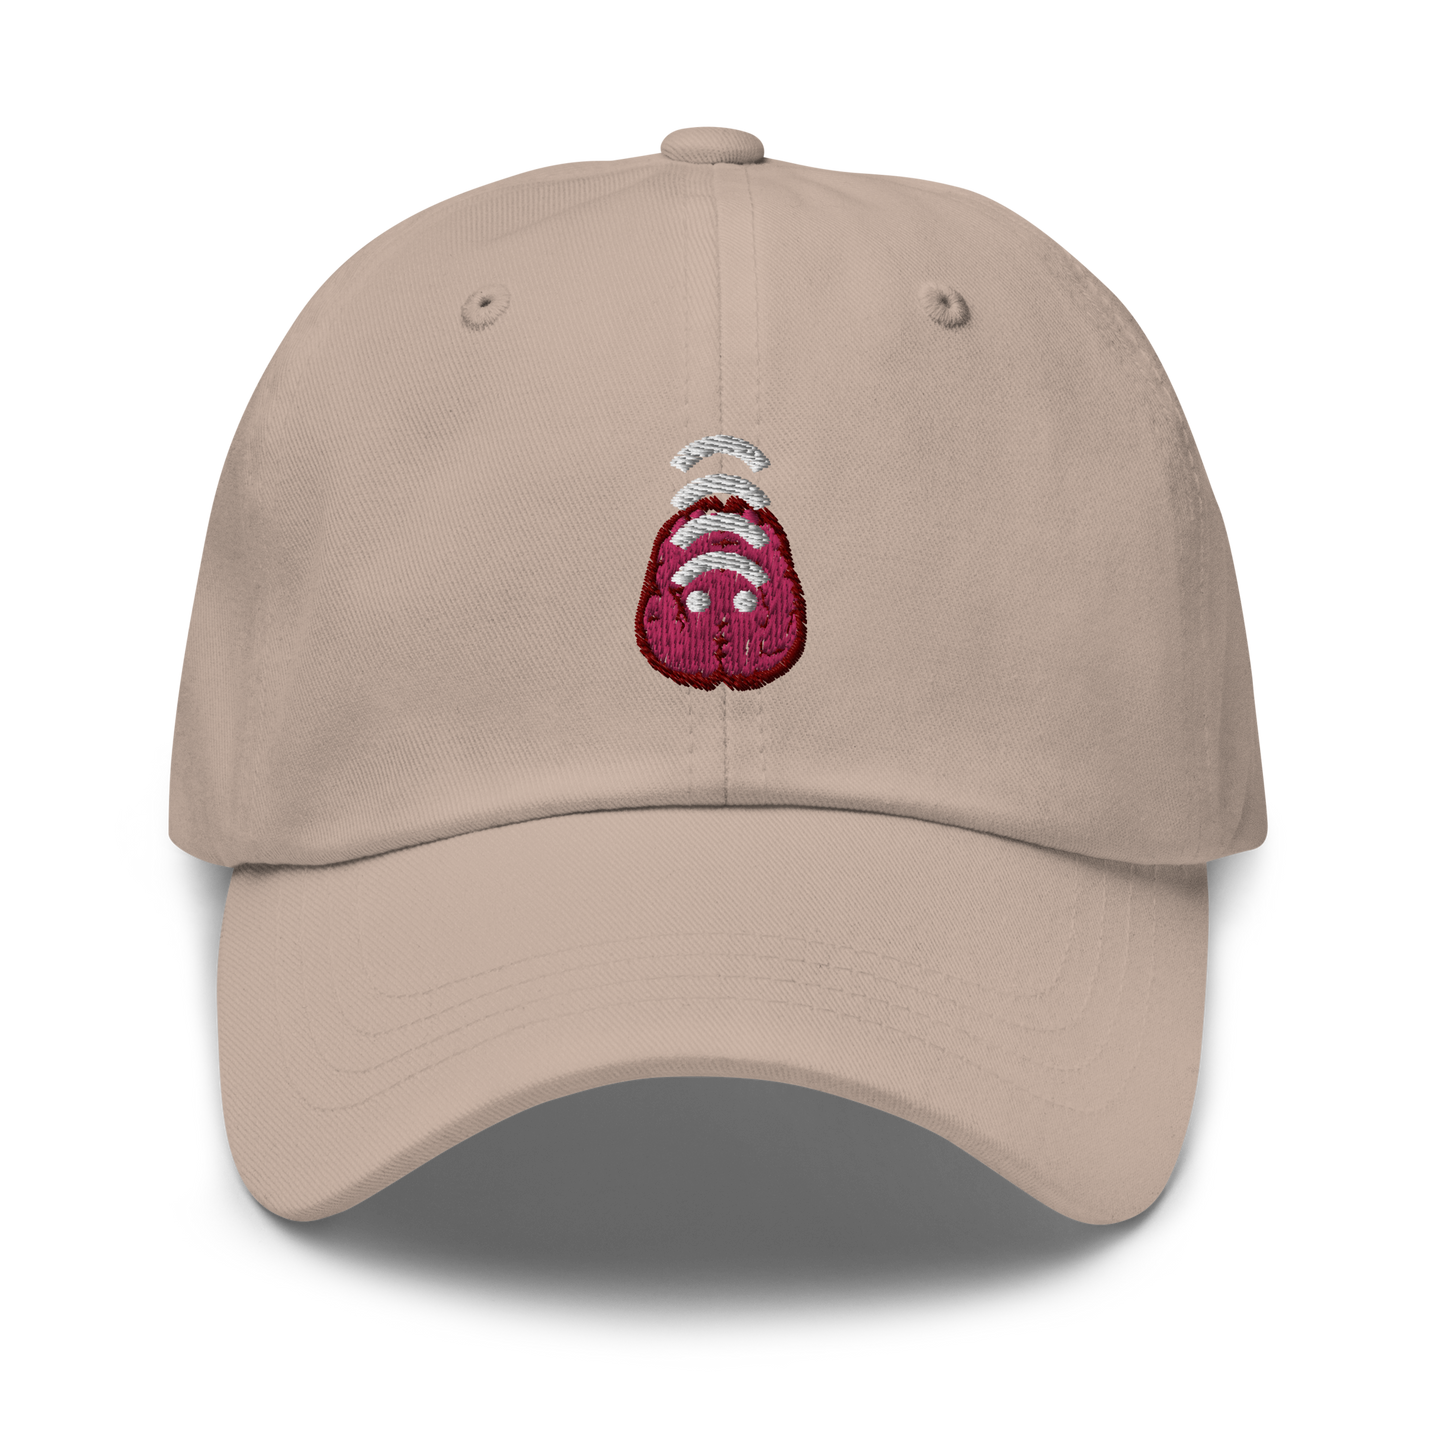 SILLY BRAIN SYNDROME DAD HAT